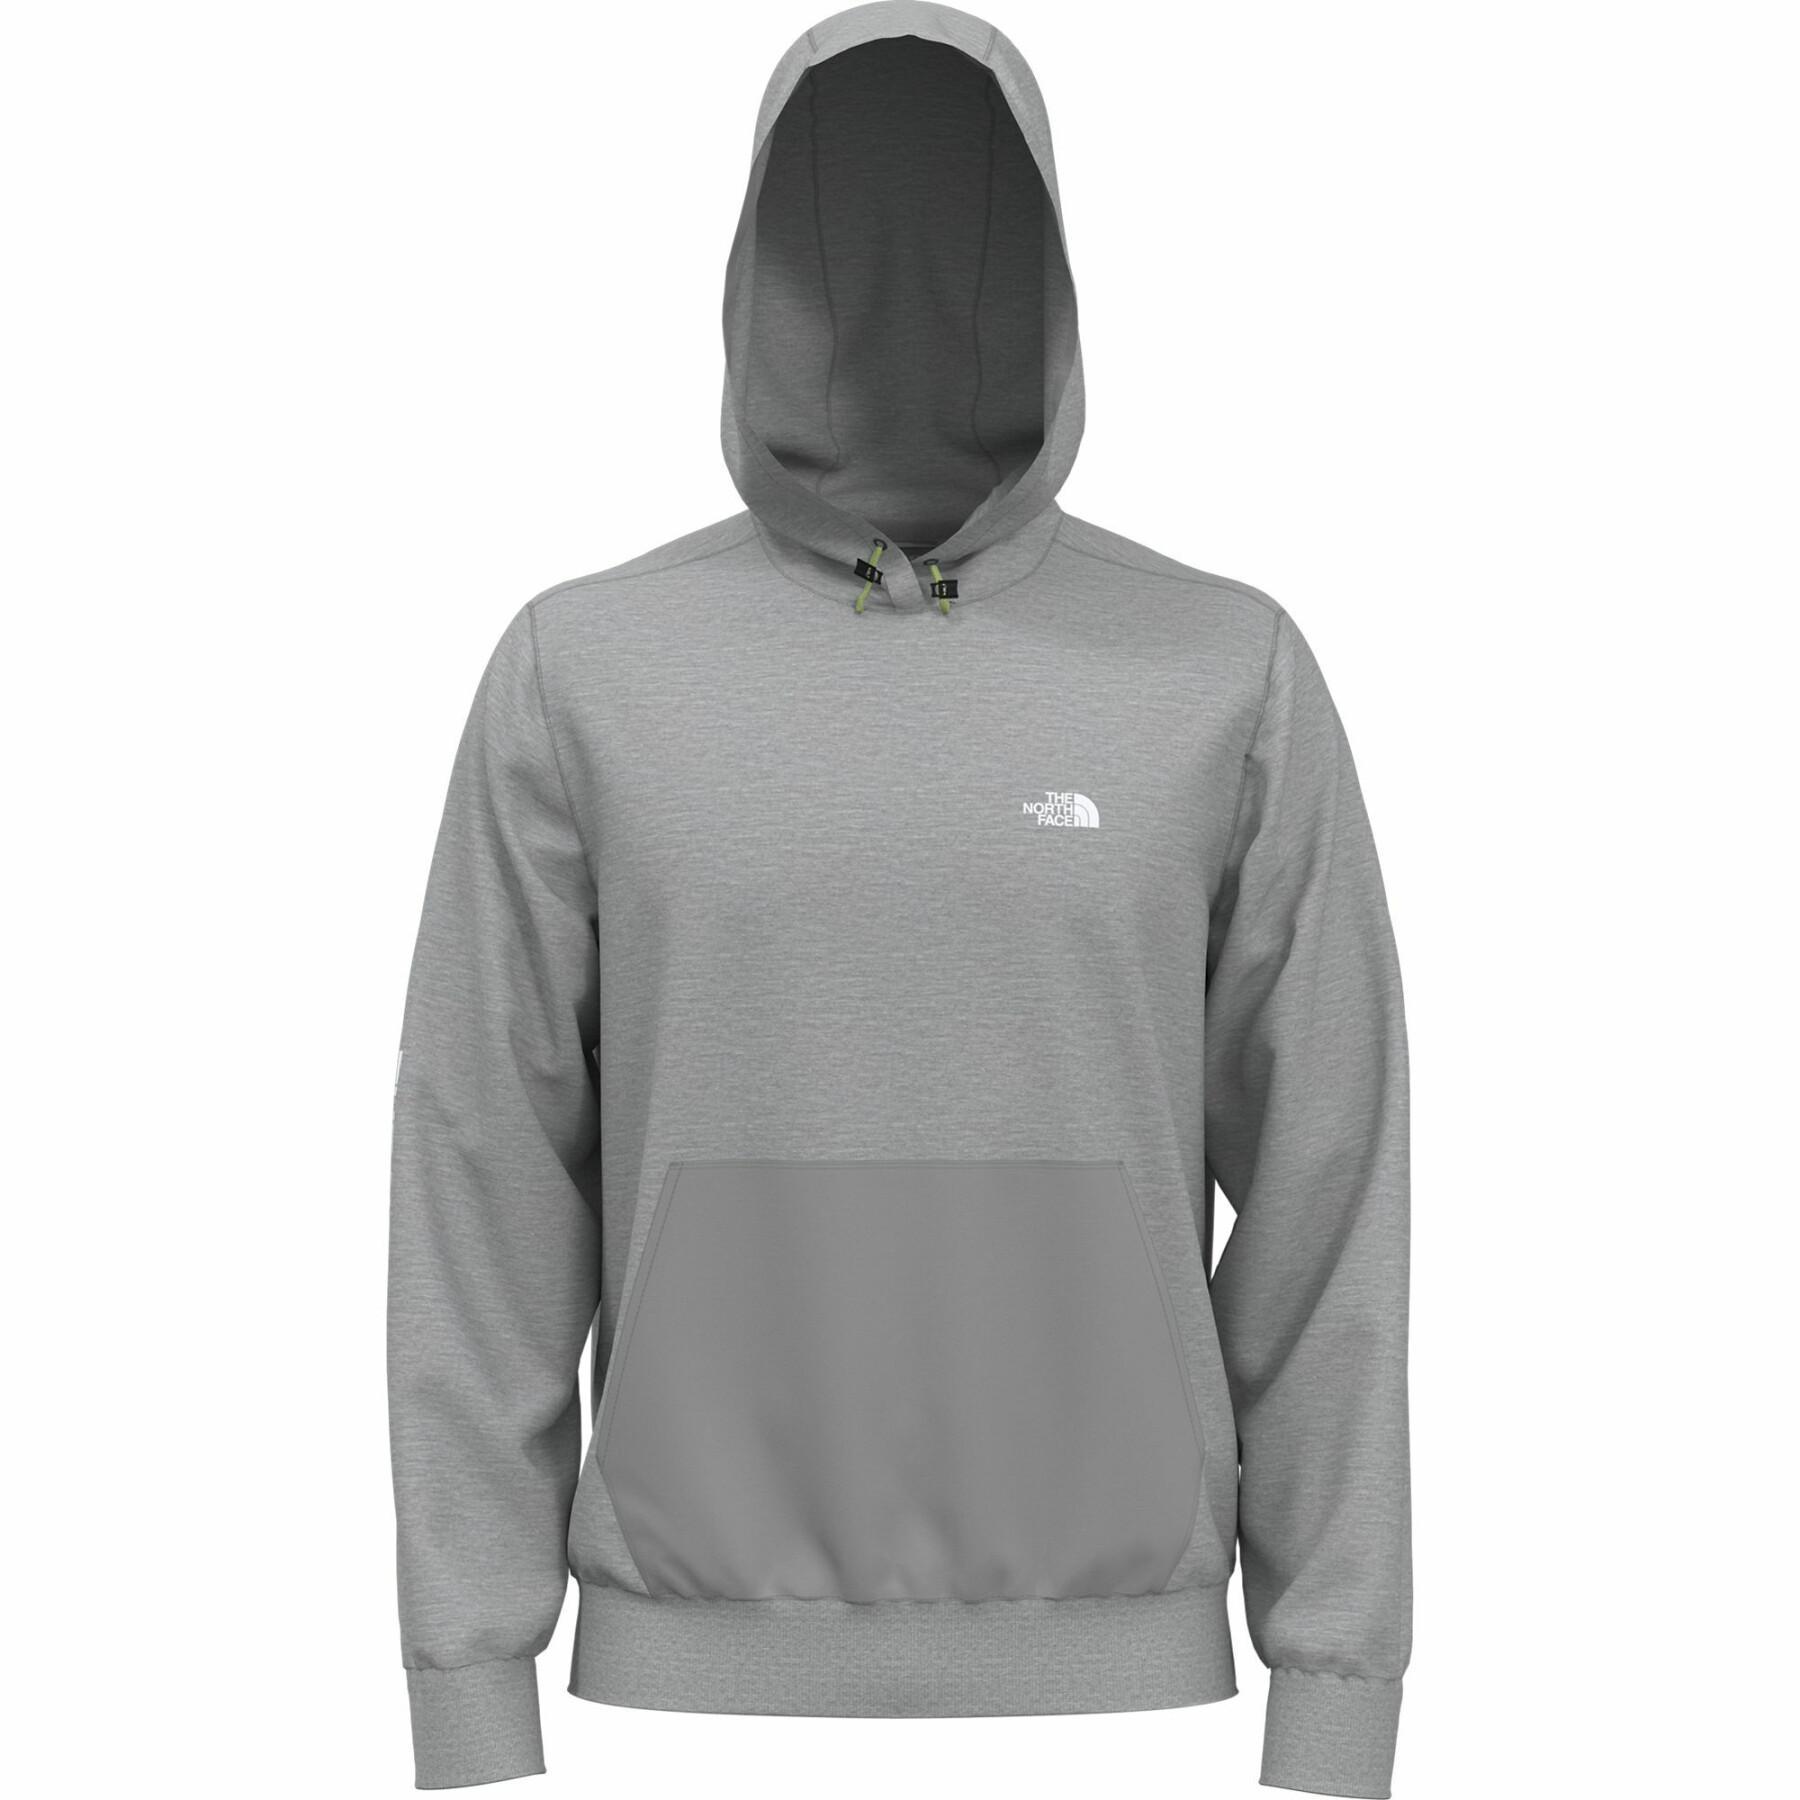 Hooded sweatshirt The North Face Tech